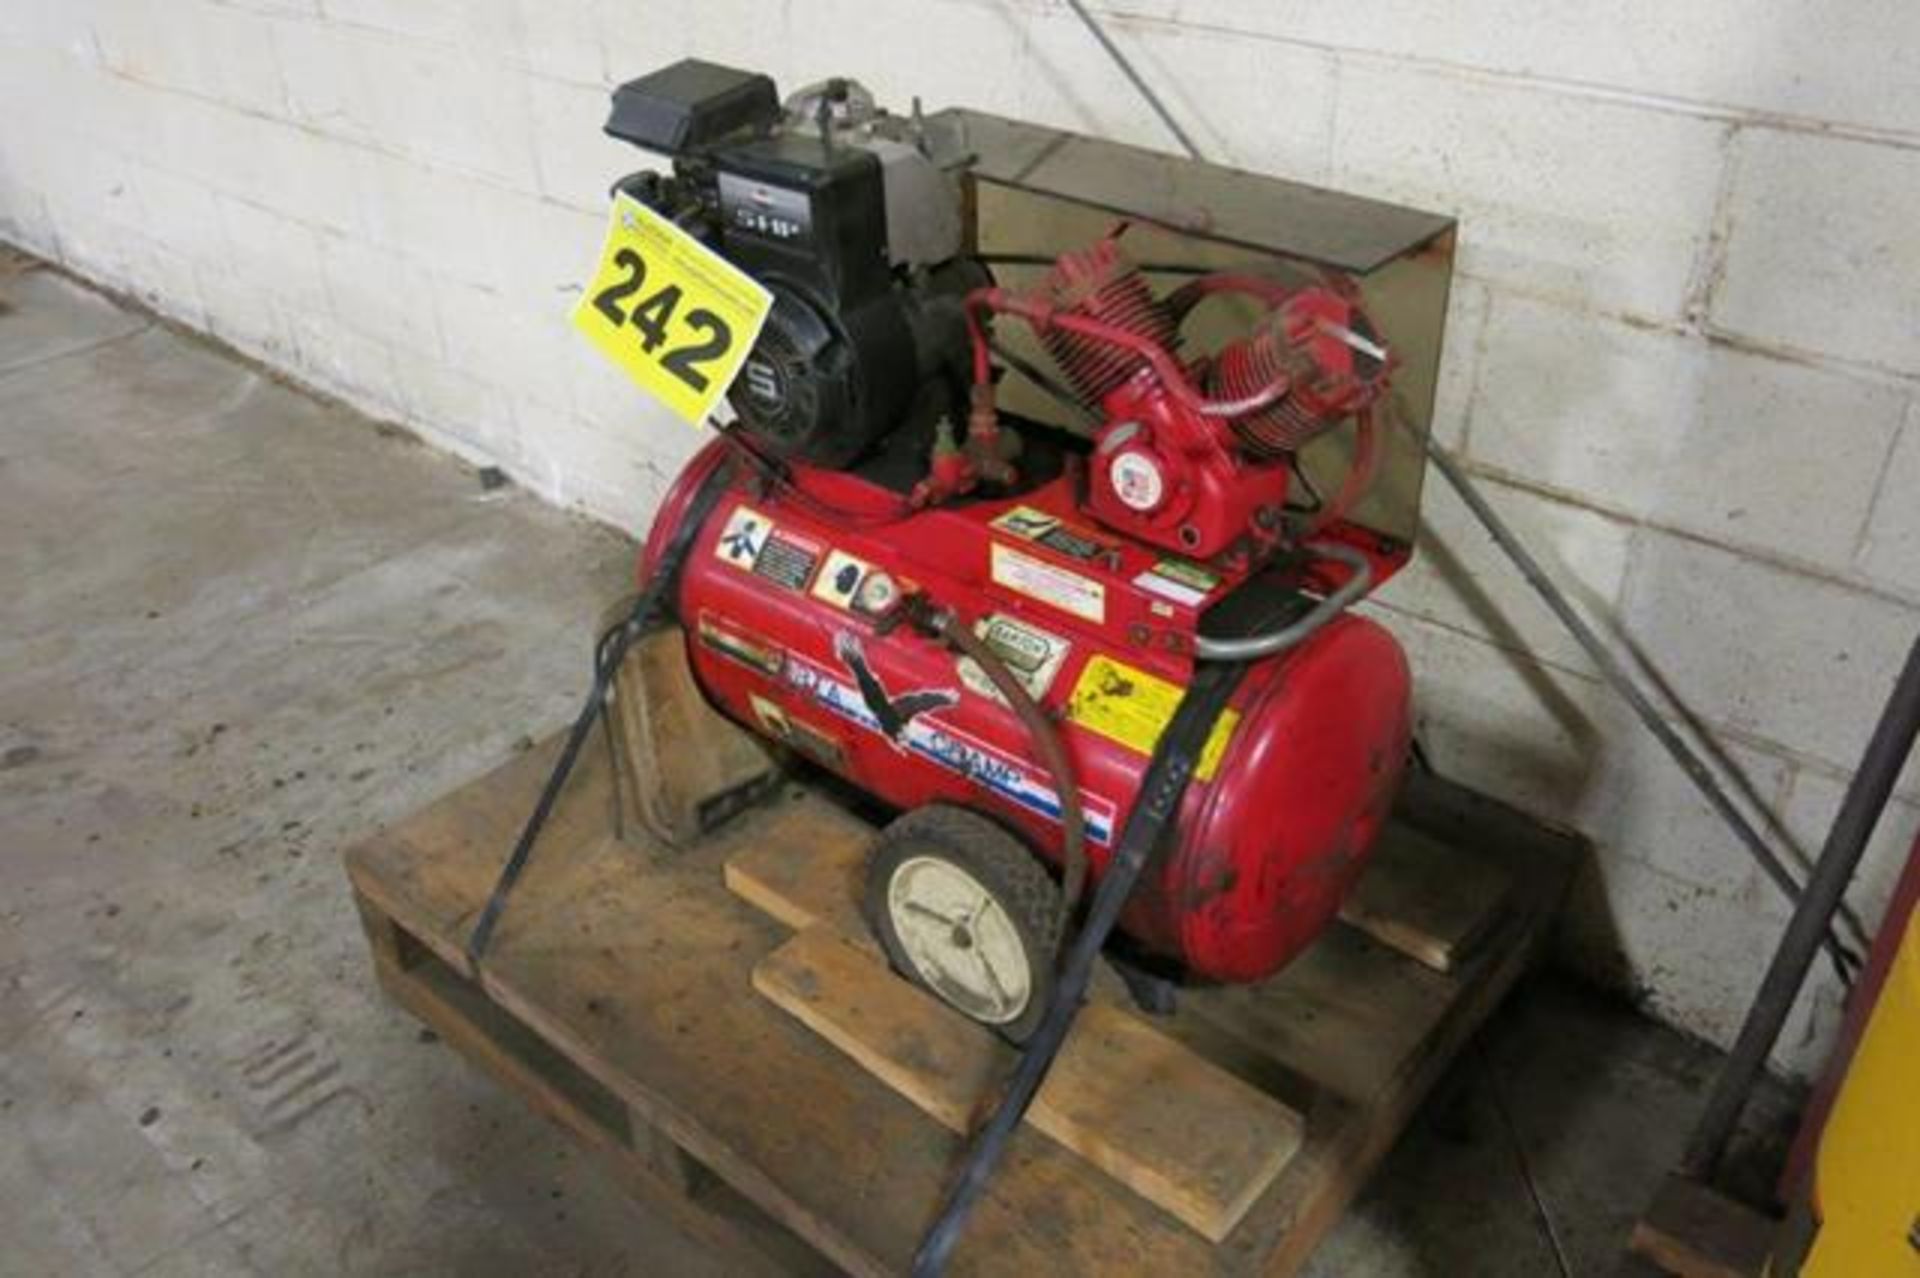 AIR COMPRESSOR, 5 HP, TANK MOUNTED, PISTON TYPE, GAS POWERED, COMPRESSOR - Image 2 of 3